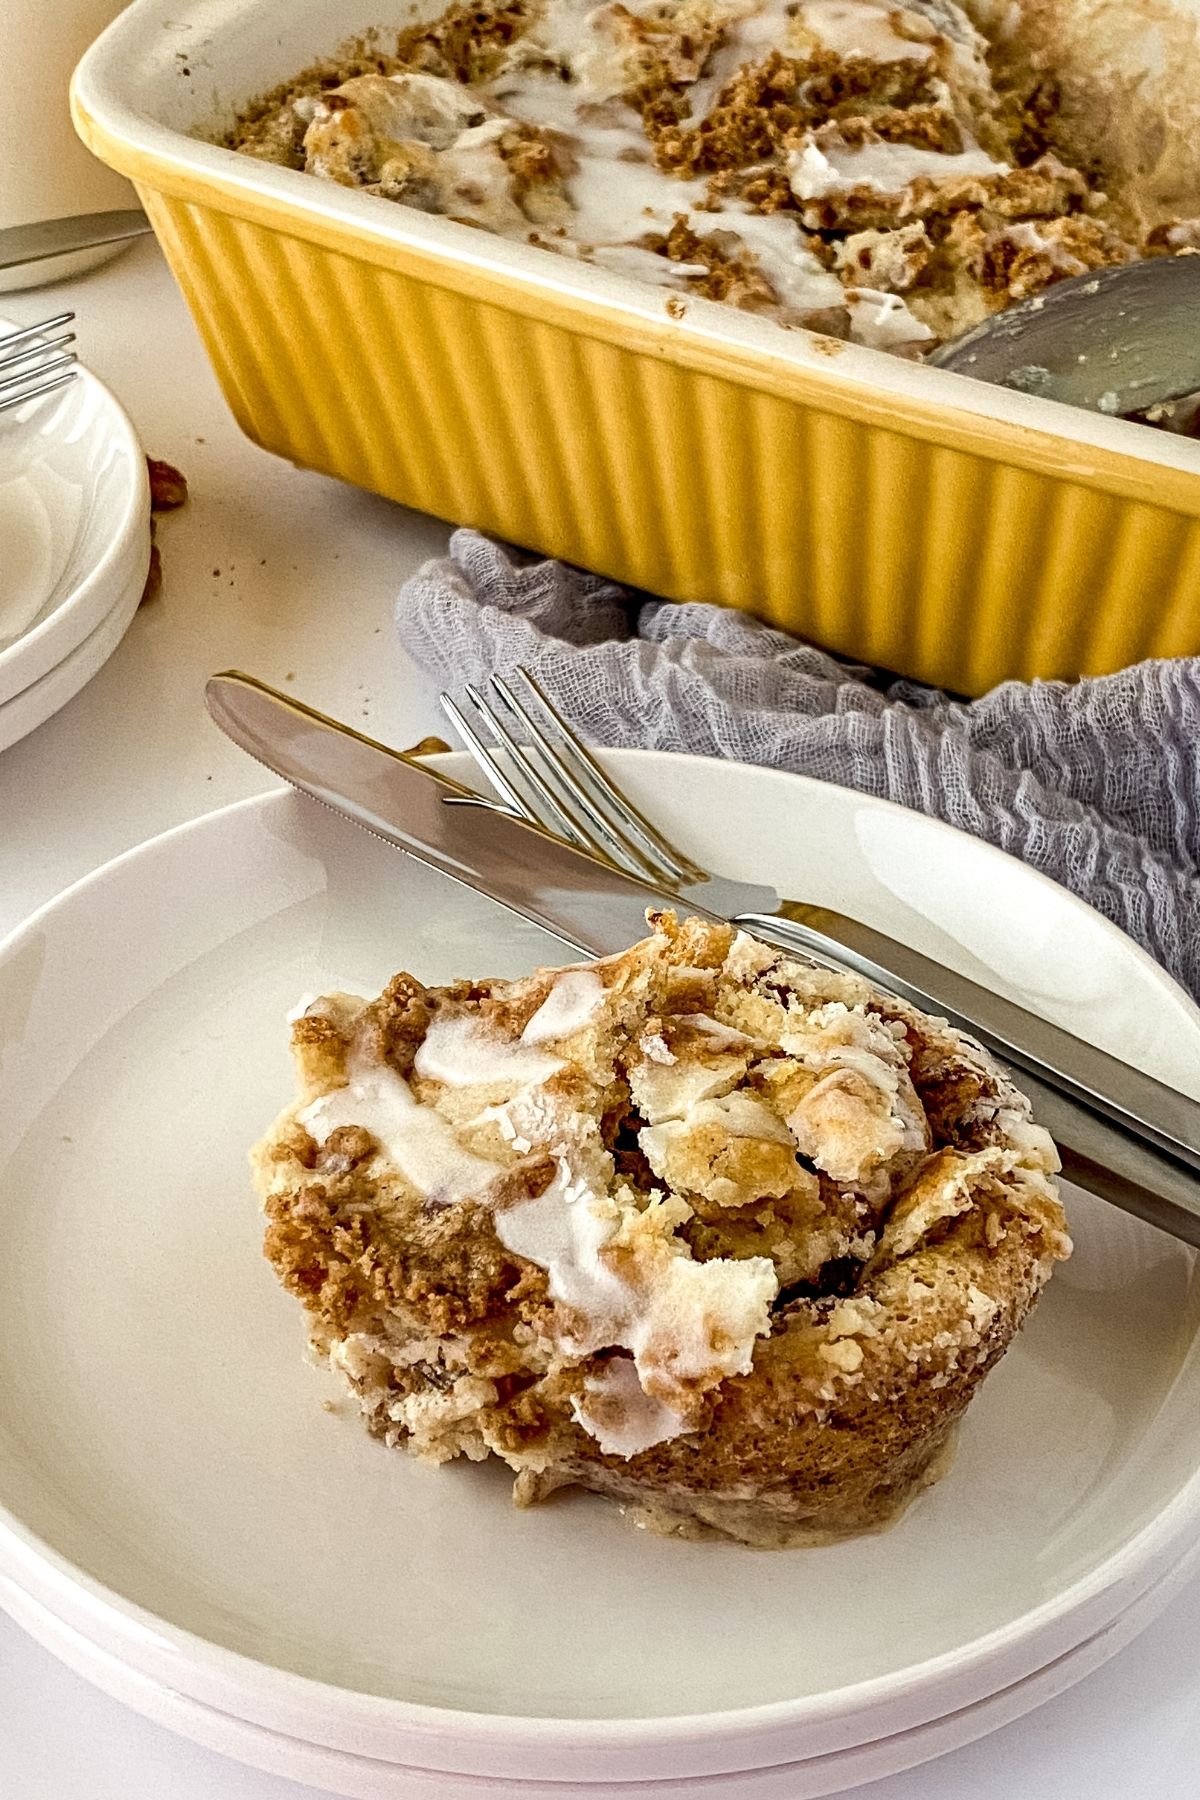 slice of cinnamon roll cake on white plate by yellow baking dish and blue napkin